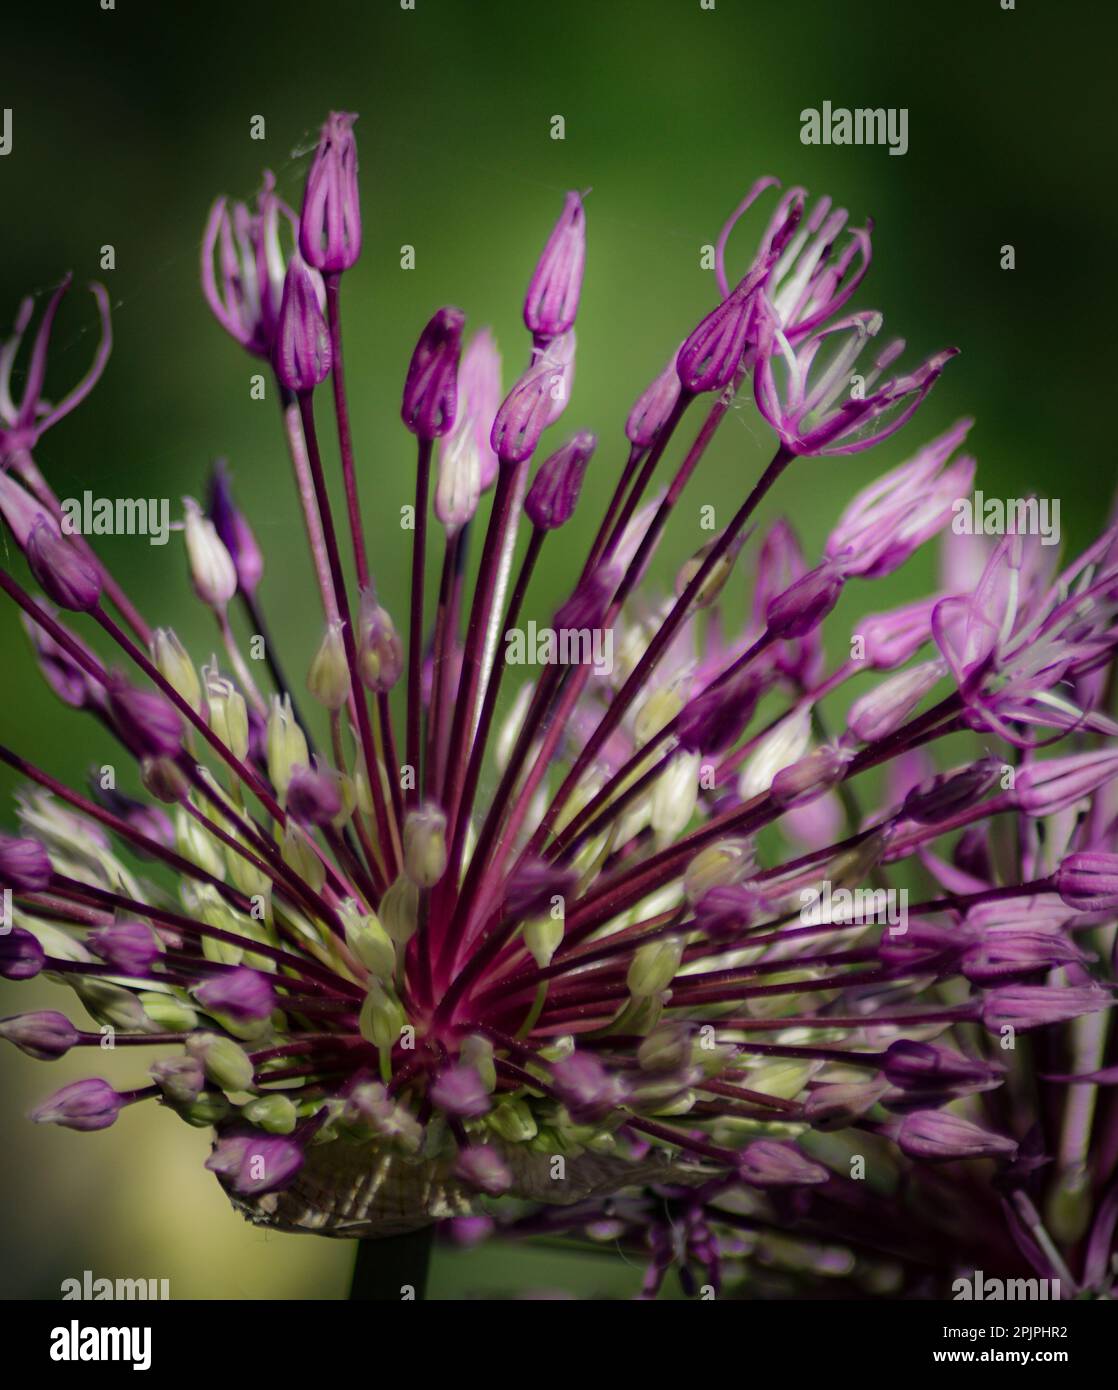 Close-up of purple flowering plant against green background Stock Photo